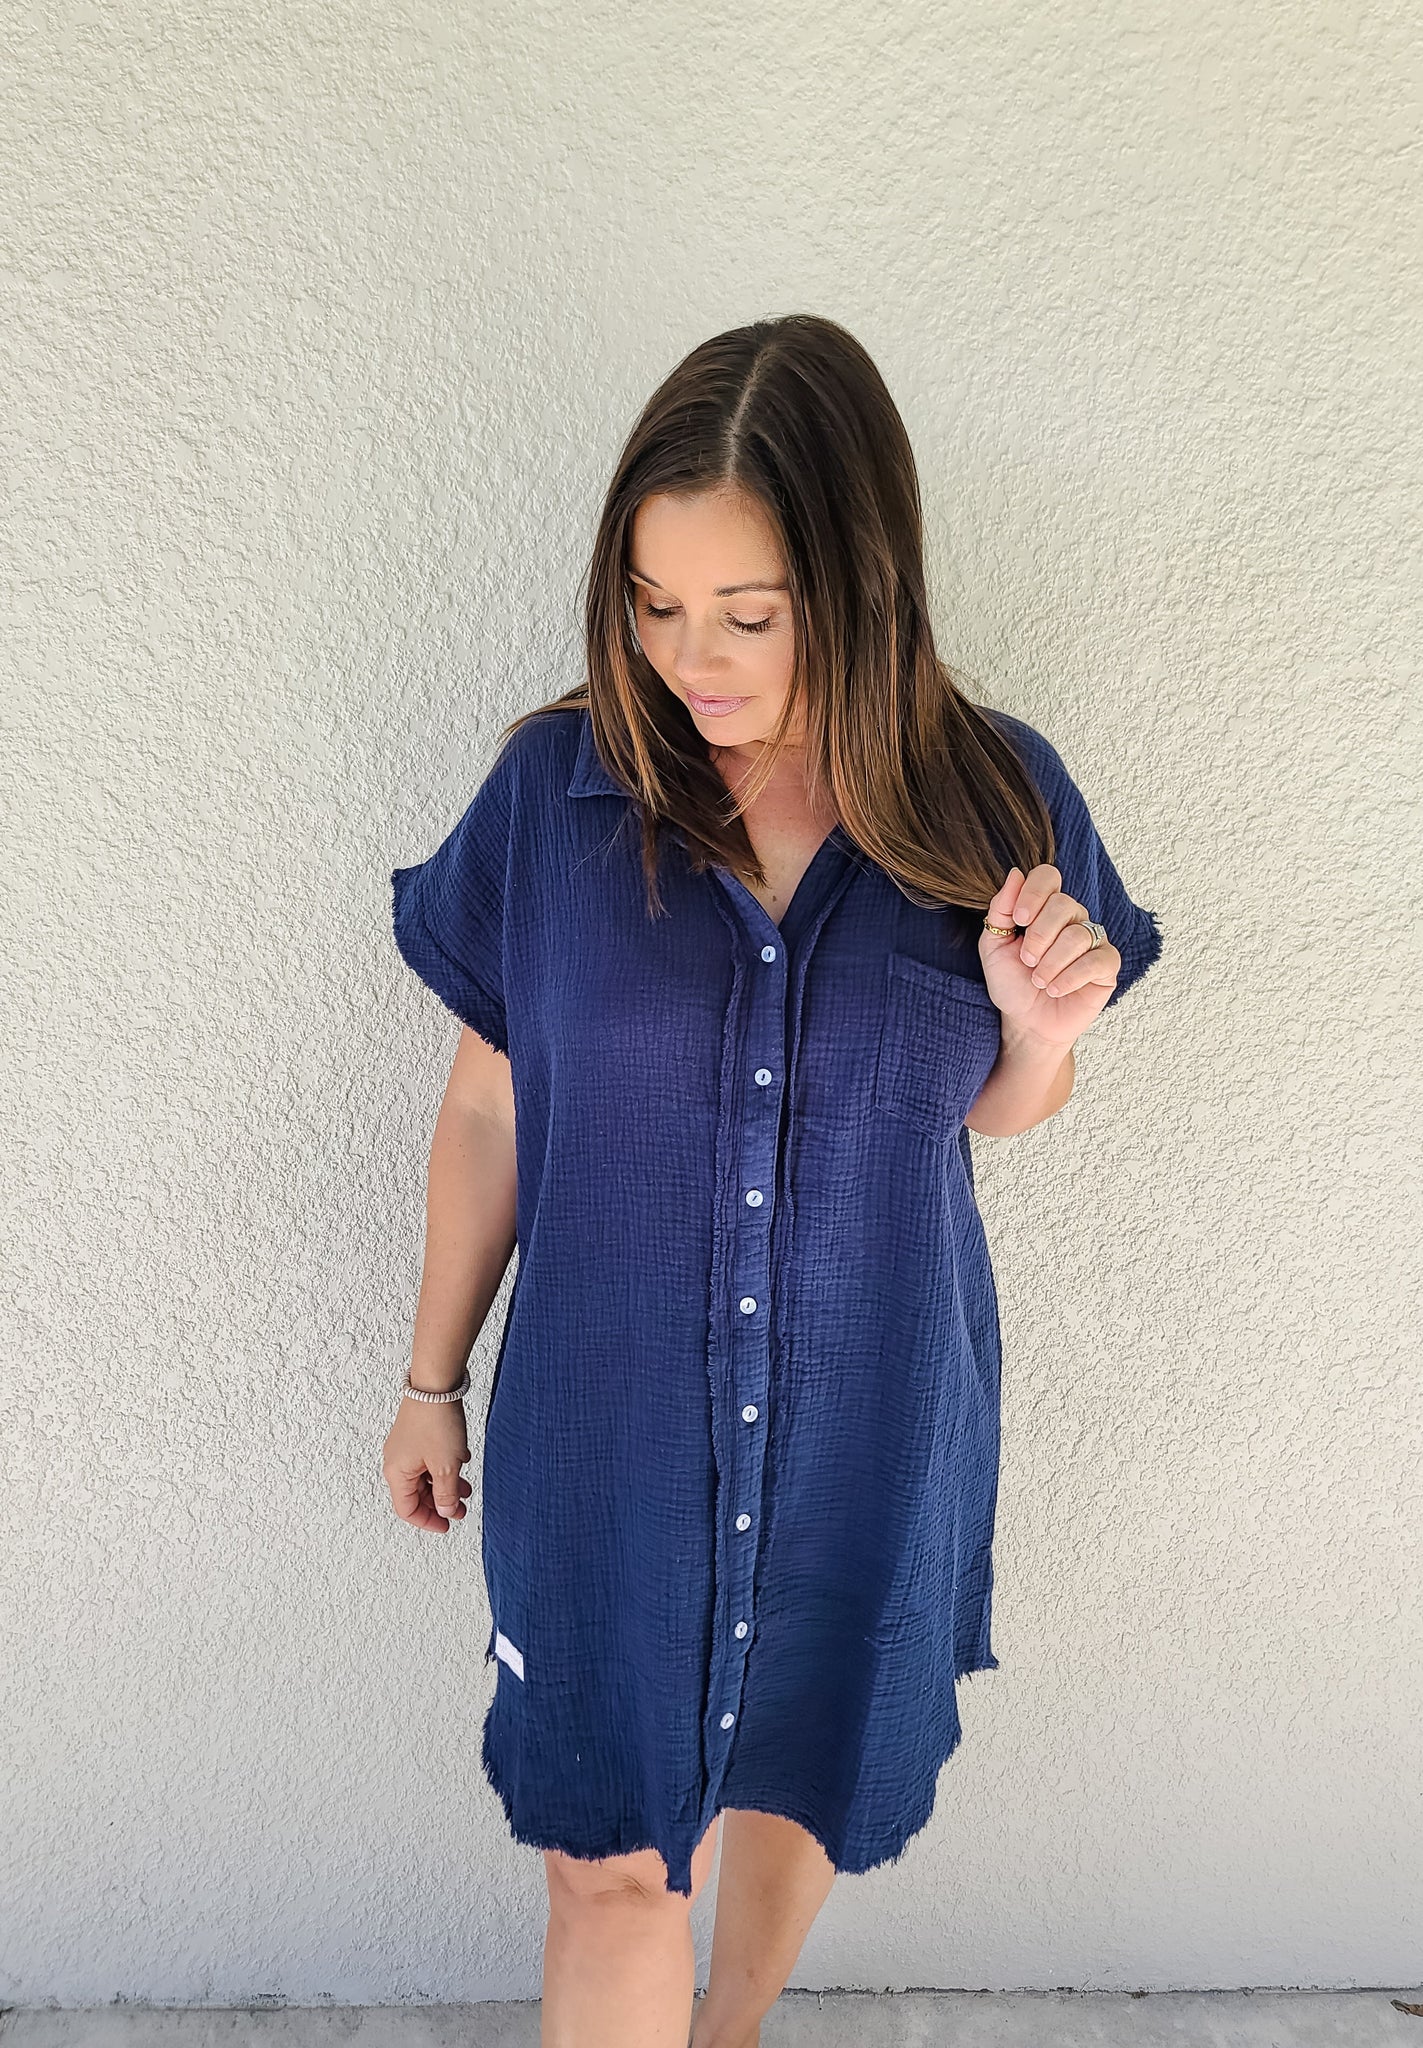 Keep It Casual Simply Southern Dress - NAVY